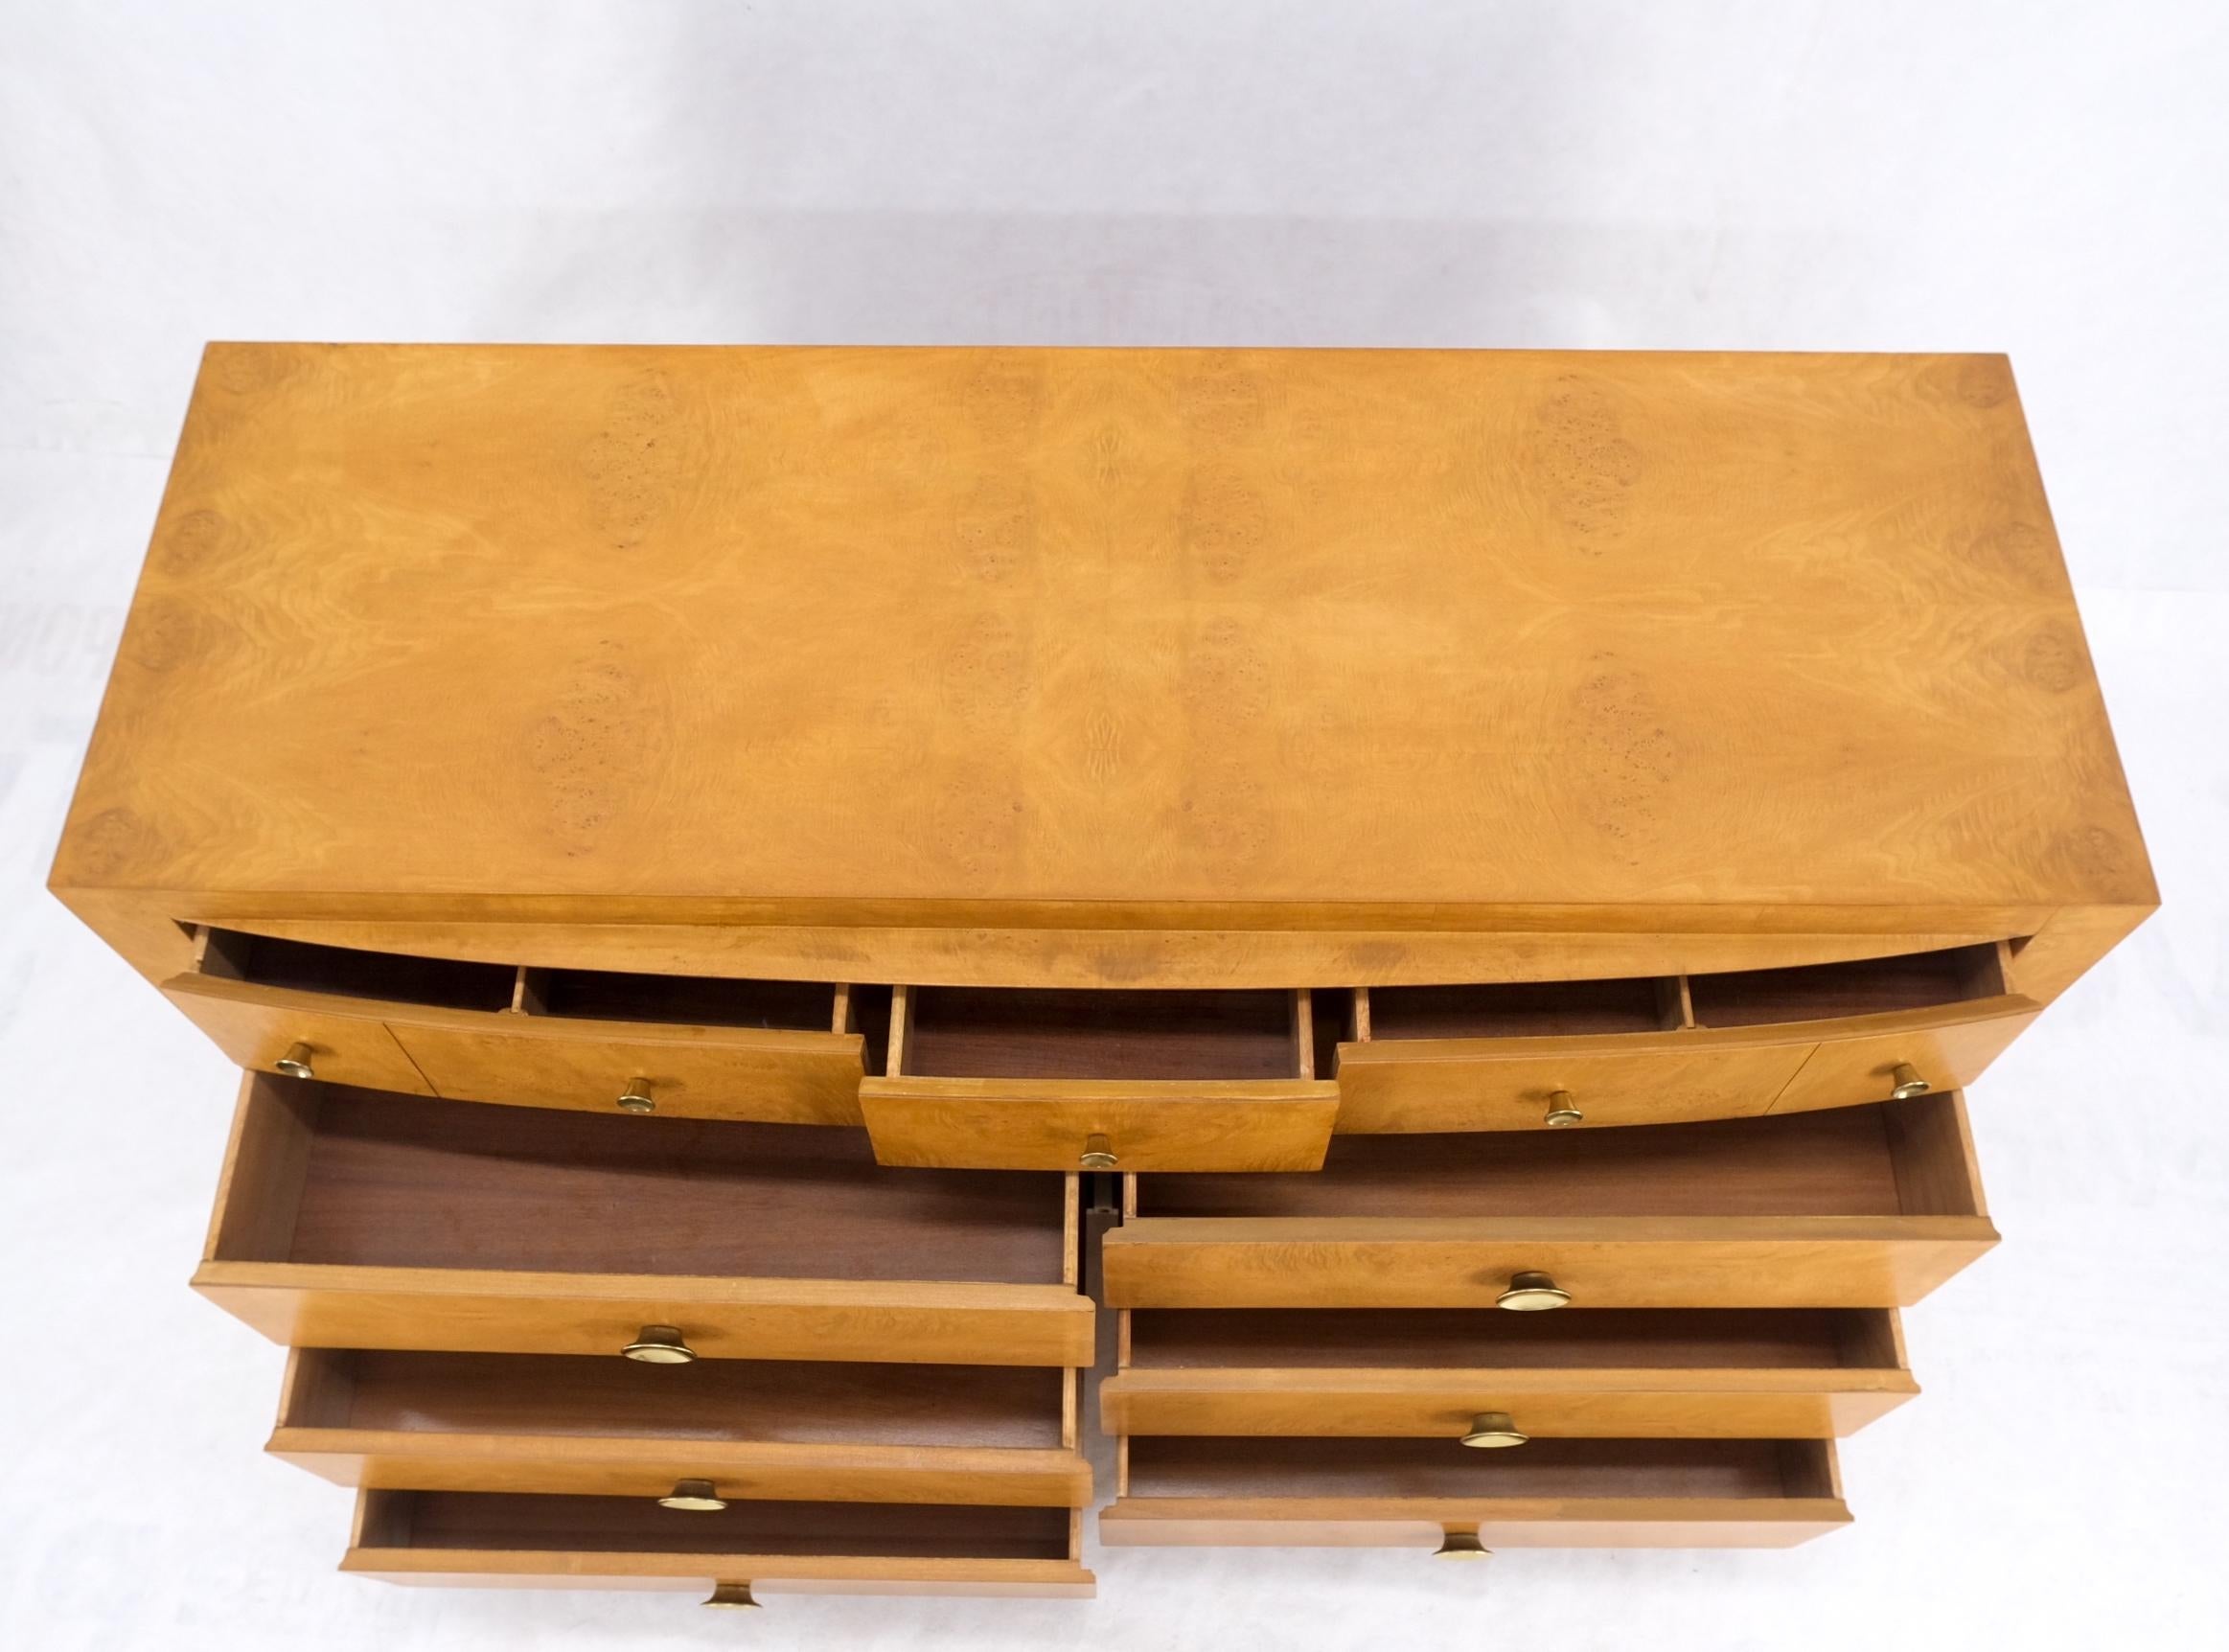 9 Drawers Art Deco Mid-Century Modern Burl Wood Bow Front Dresser Brass Pulls  In Good Condition For Sale In Rockaway, NJ